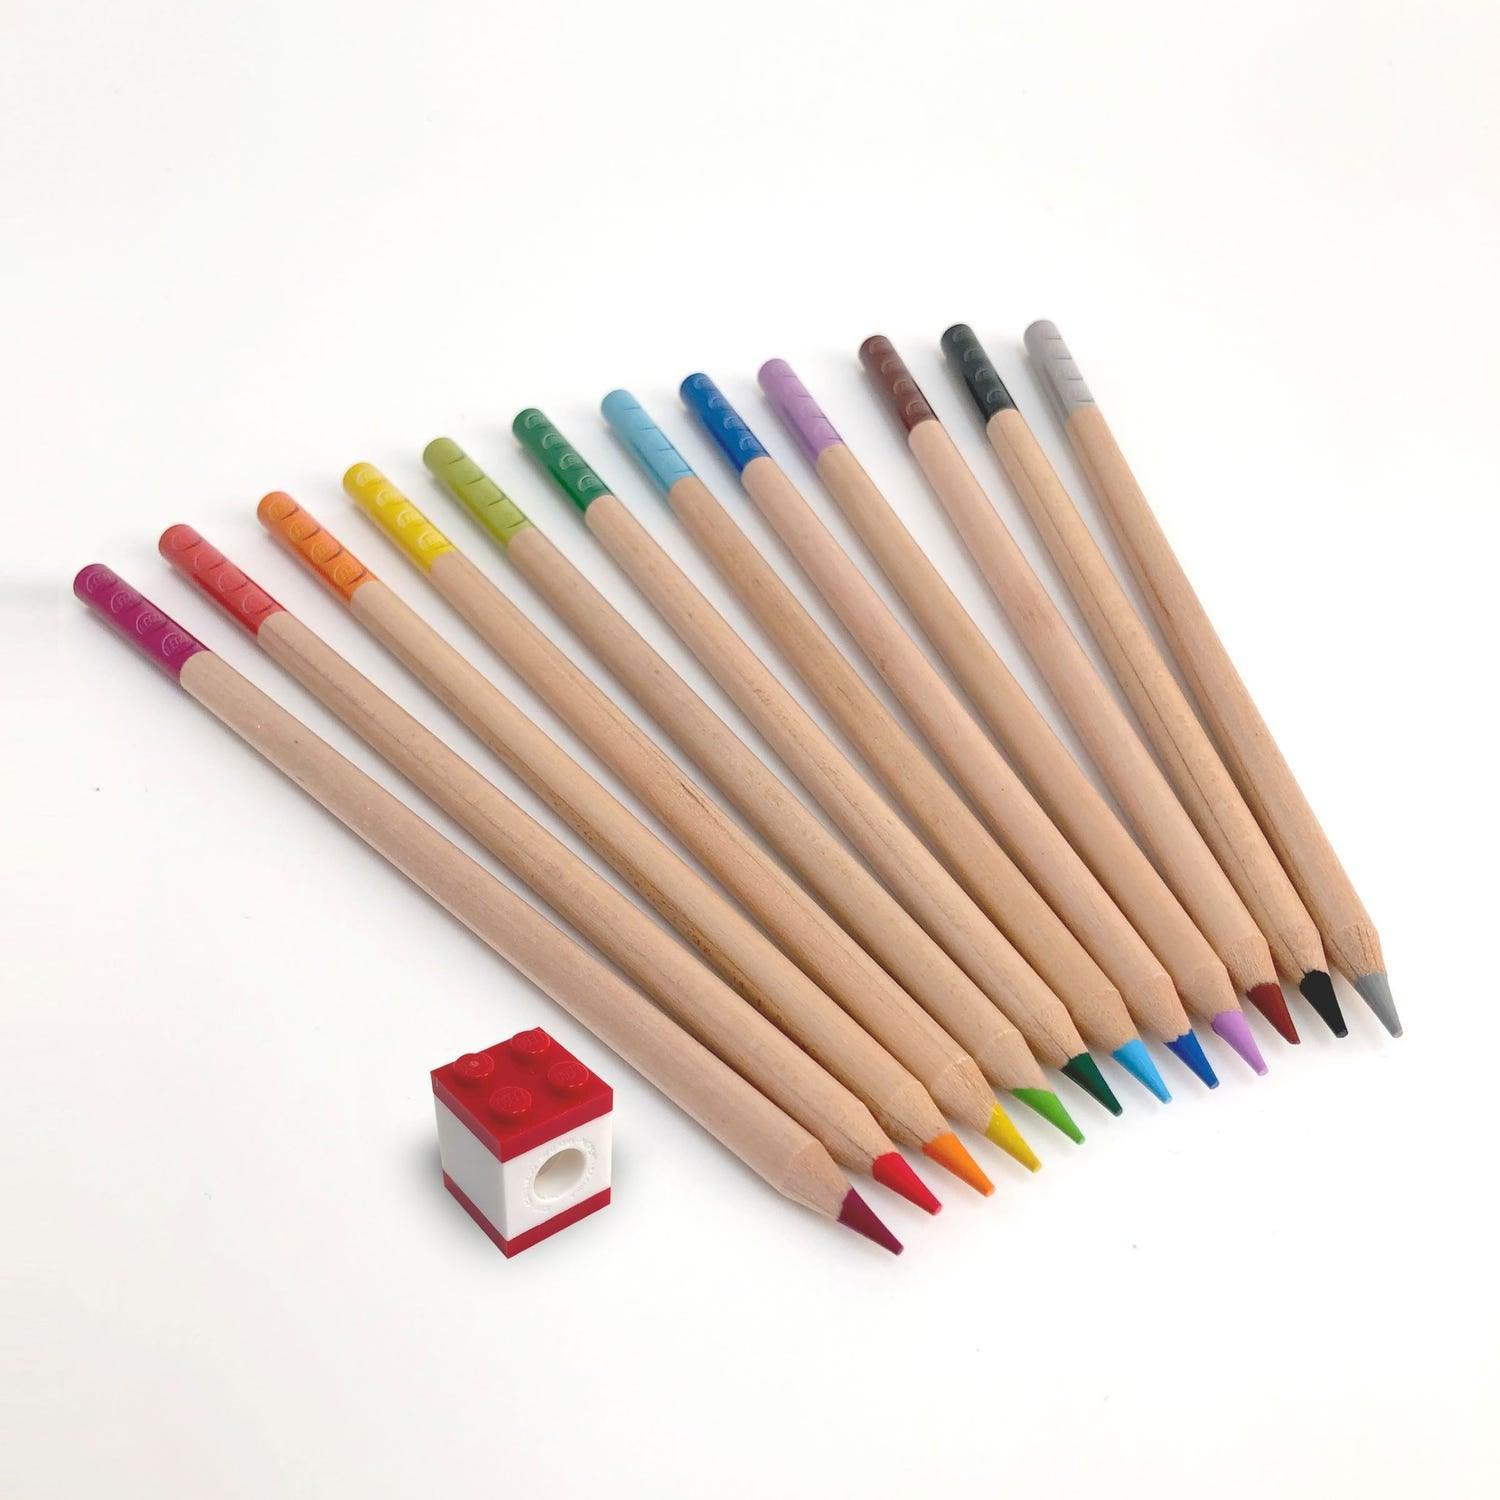 LEGO 2 0 12 Pack Colored Pencils with Topper 5007197 Gear LEGO Gear @ 2TTOYS LEGO €. 9.99